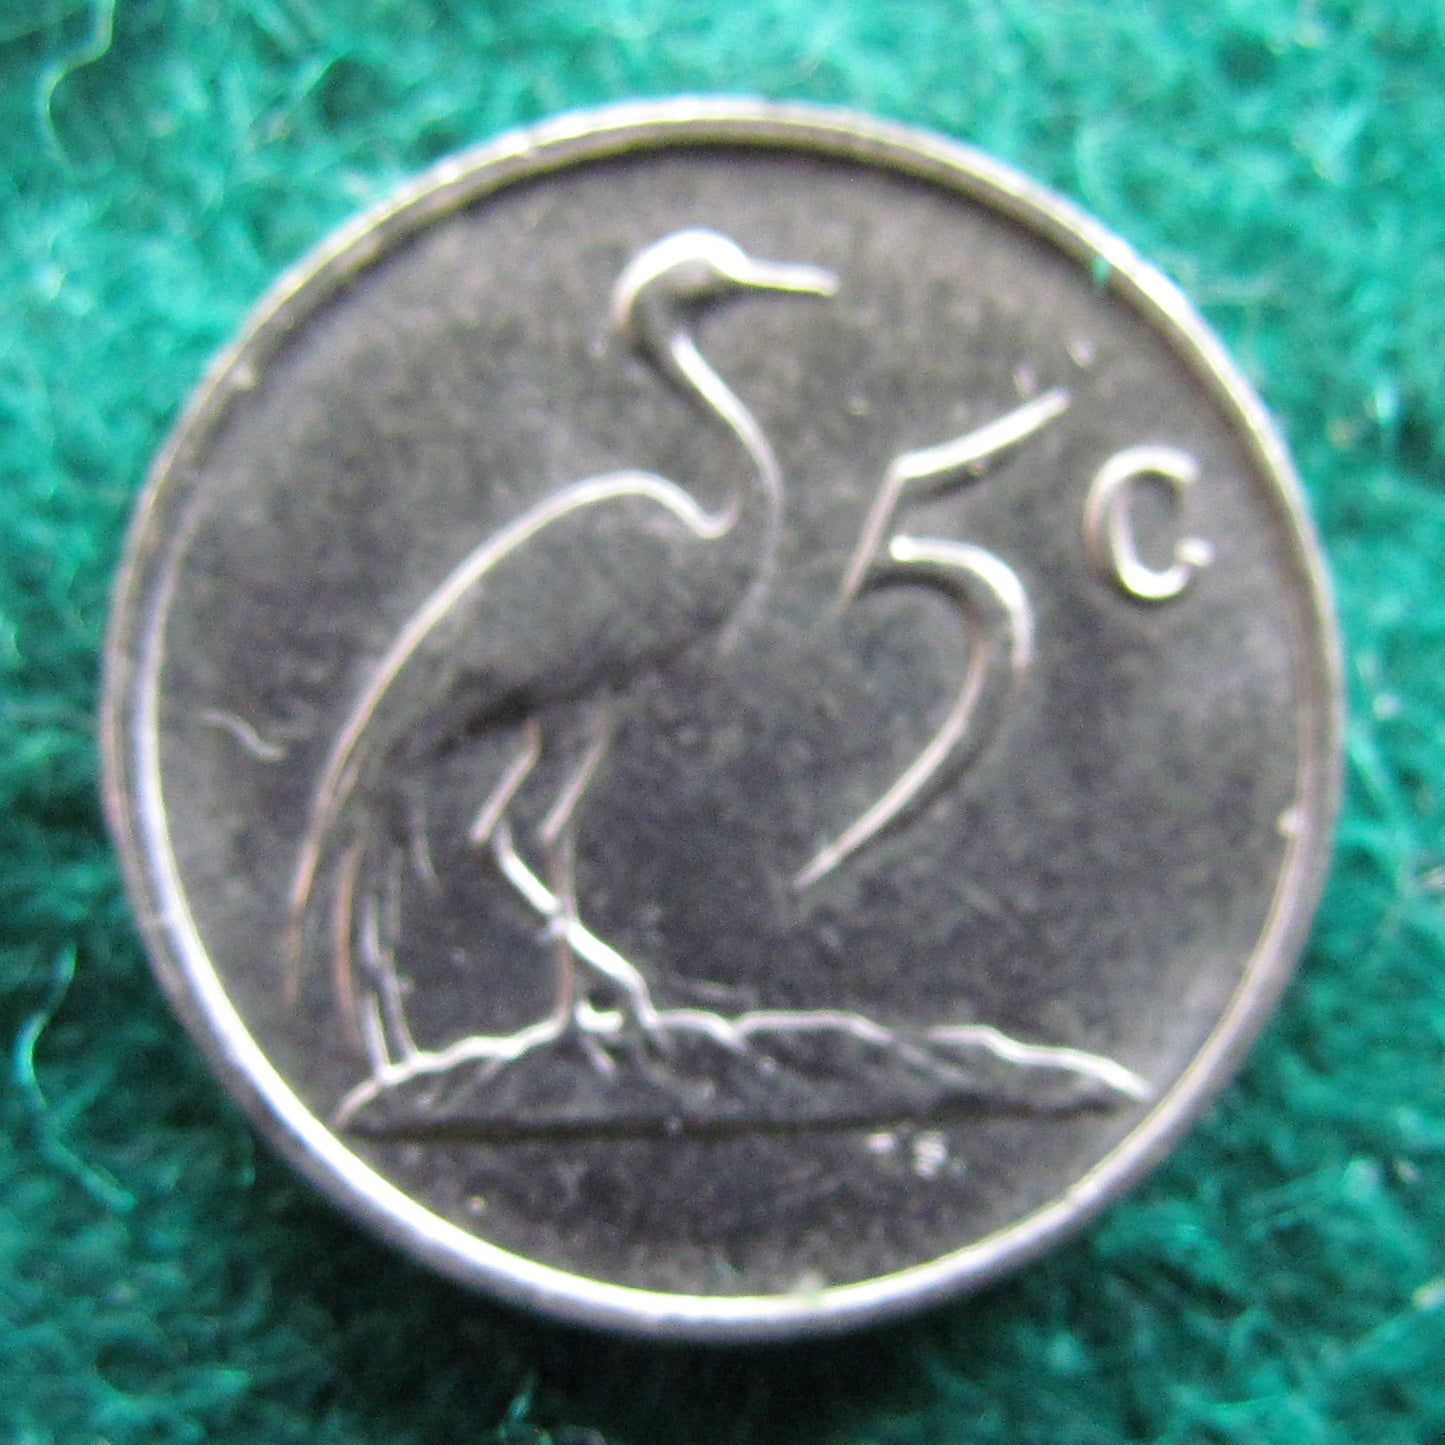 South Africa 1988 5 Cent Coin